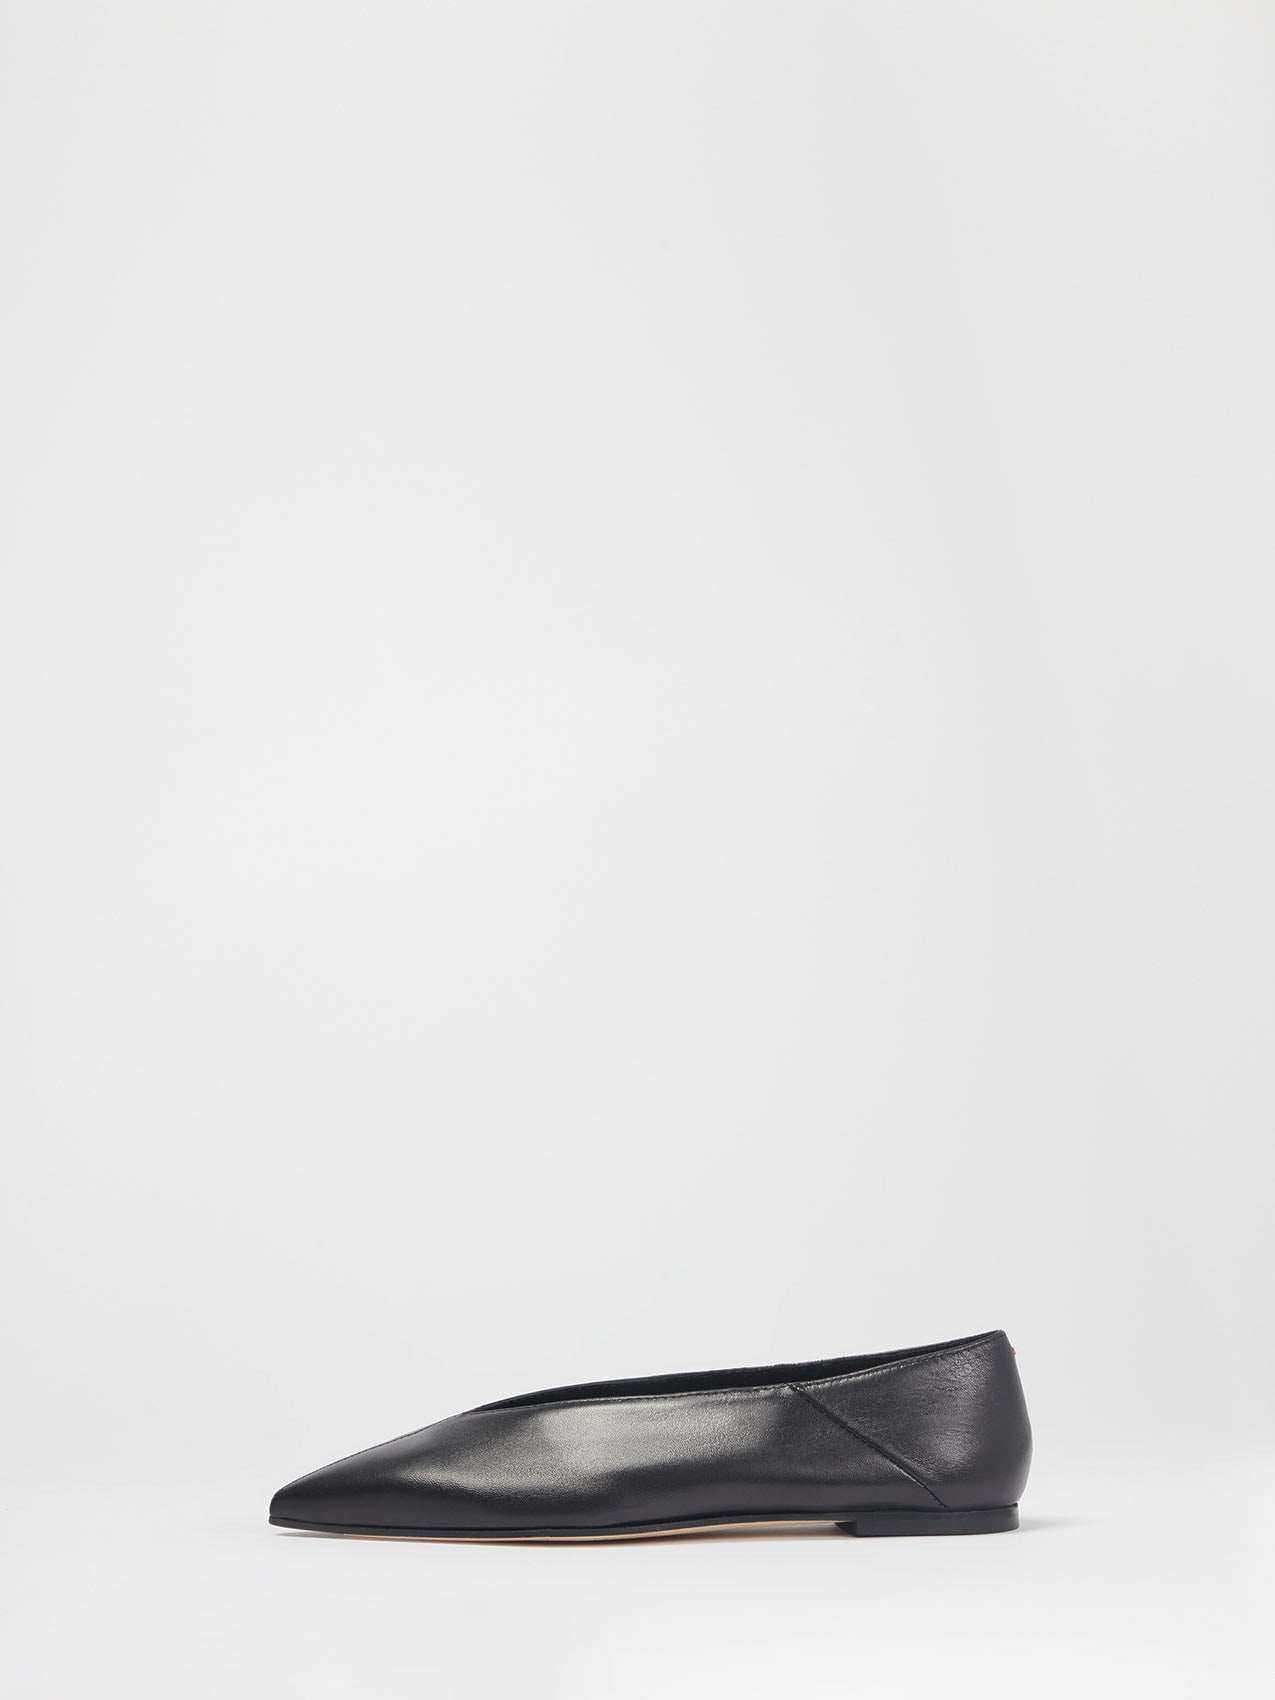 Aeyde  MOA Black Pointed Toe Flat